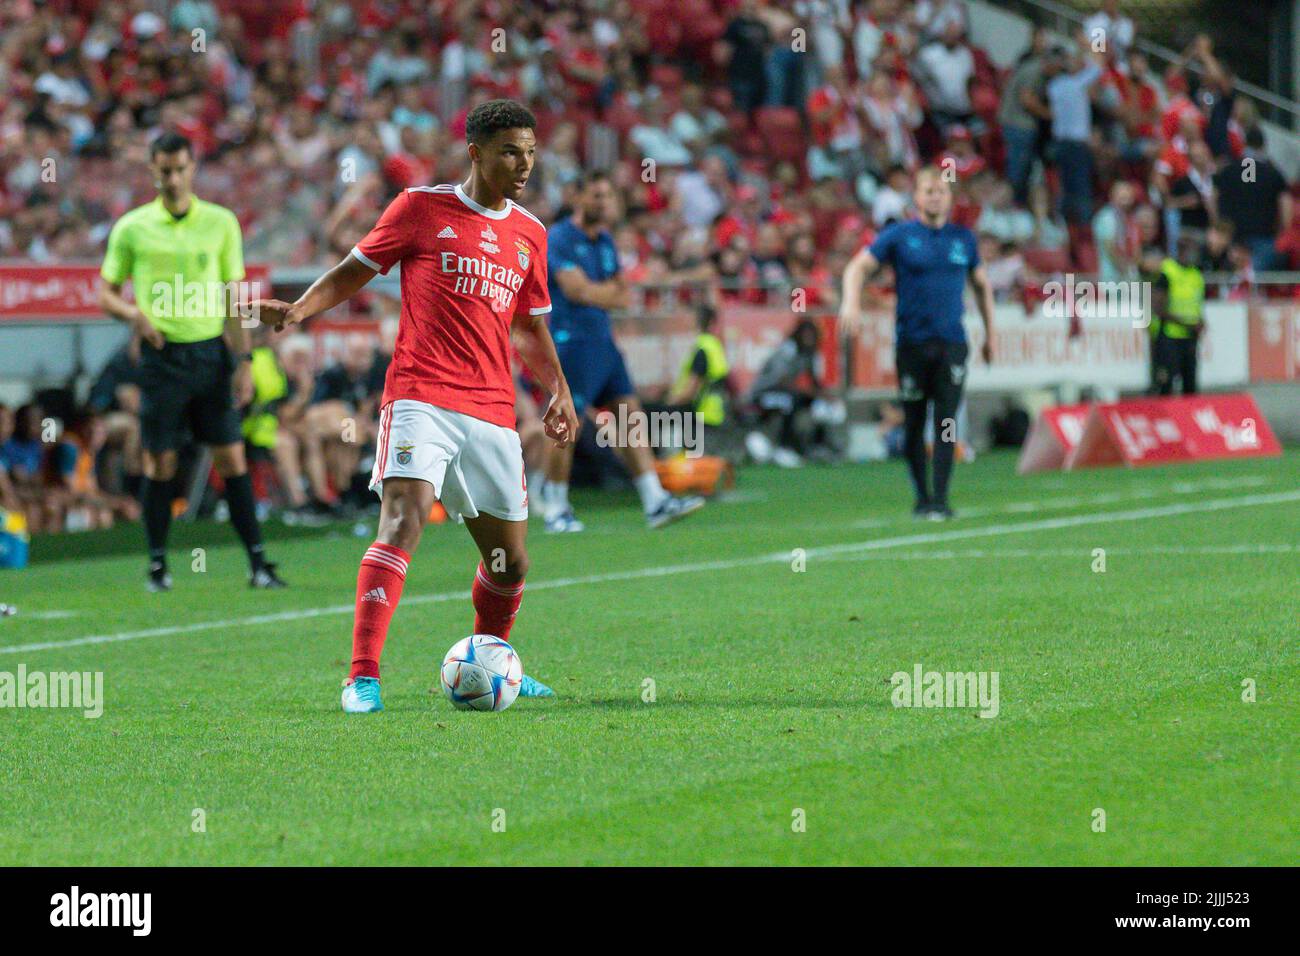 Lisbon, Portugal. July 26, 2022.  Benfica's defender from Denmark Alexander Bah (6) in action during the friendly game between SL Benfica vs Newcastle United FC Credit: Alexandre de Sousa/Alamy Live News Stock Photo